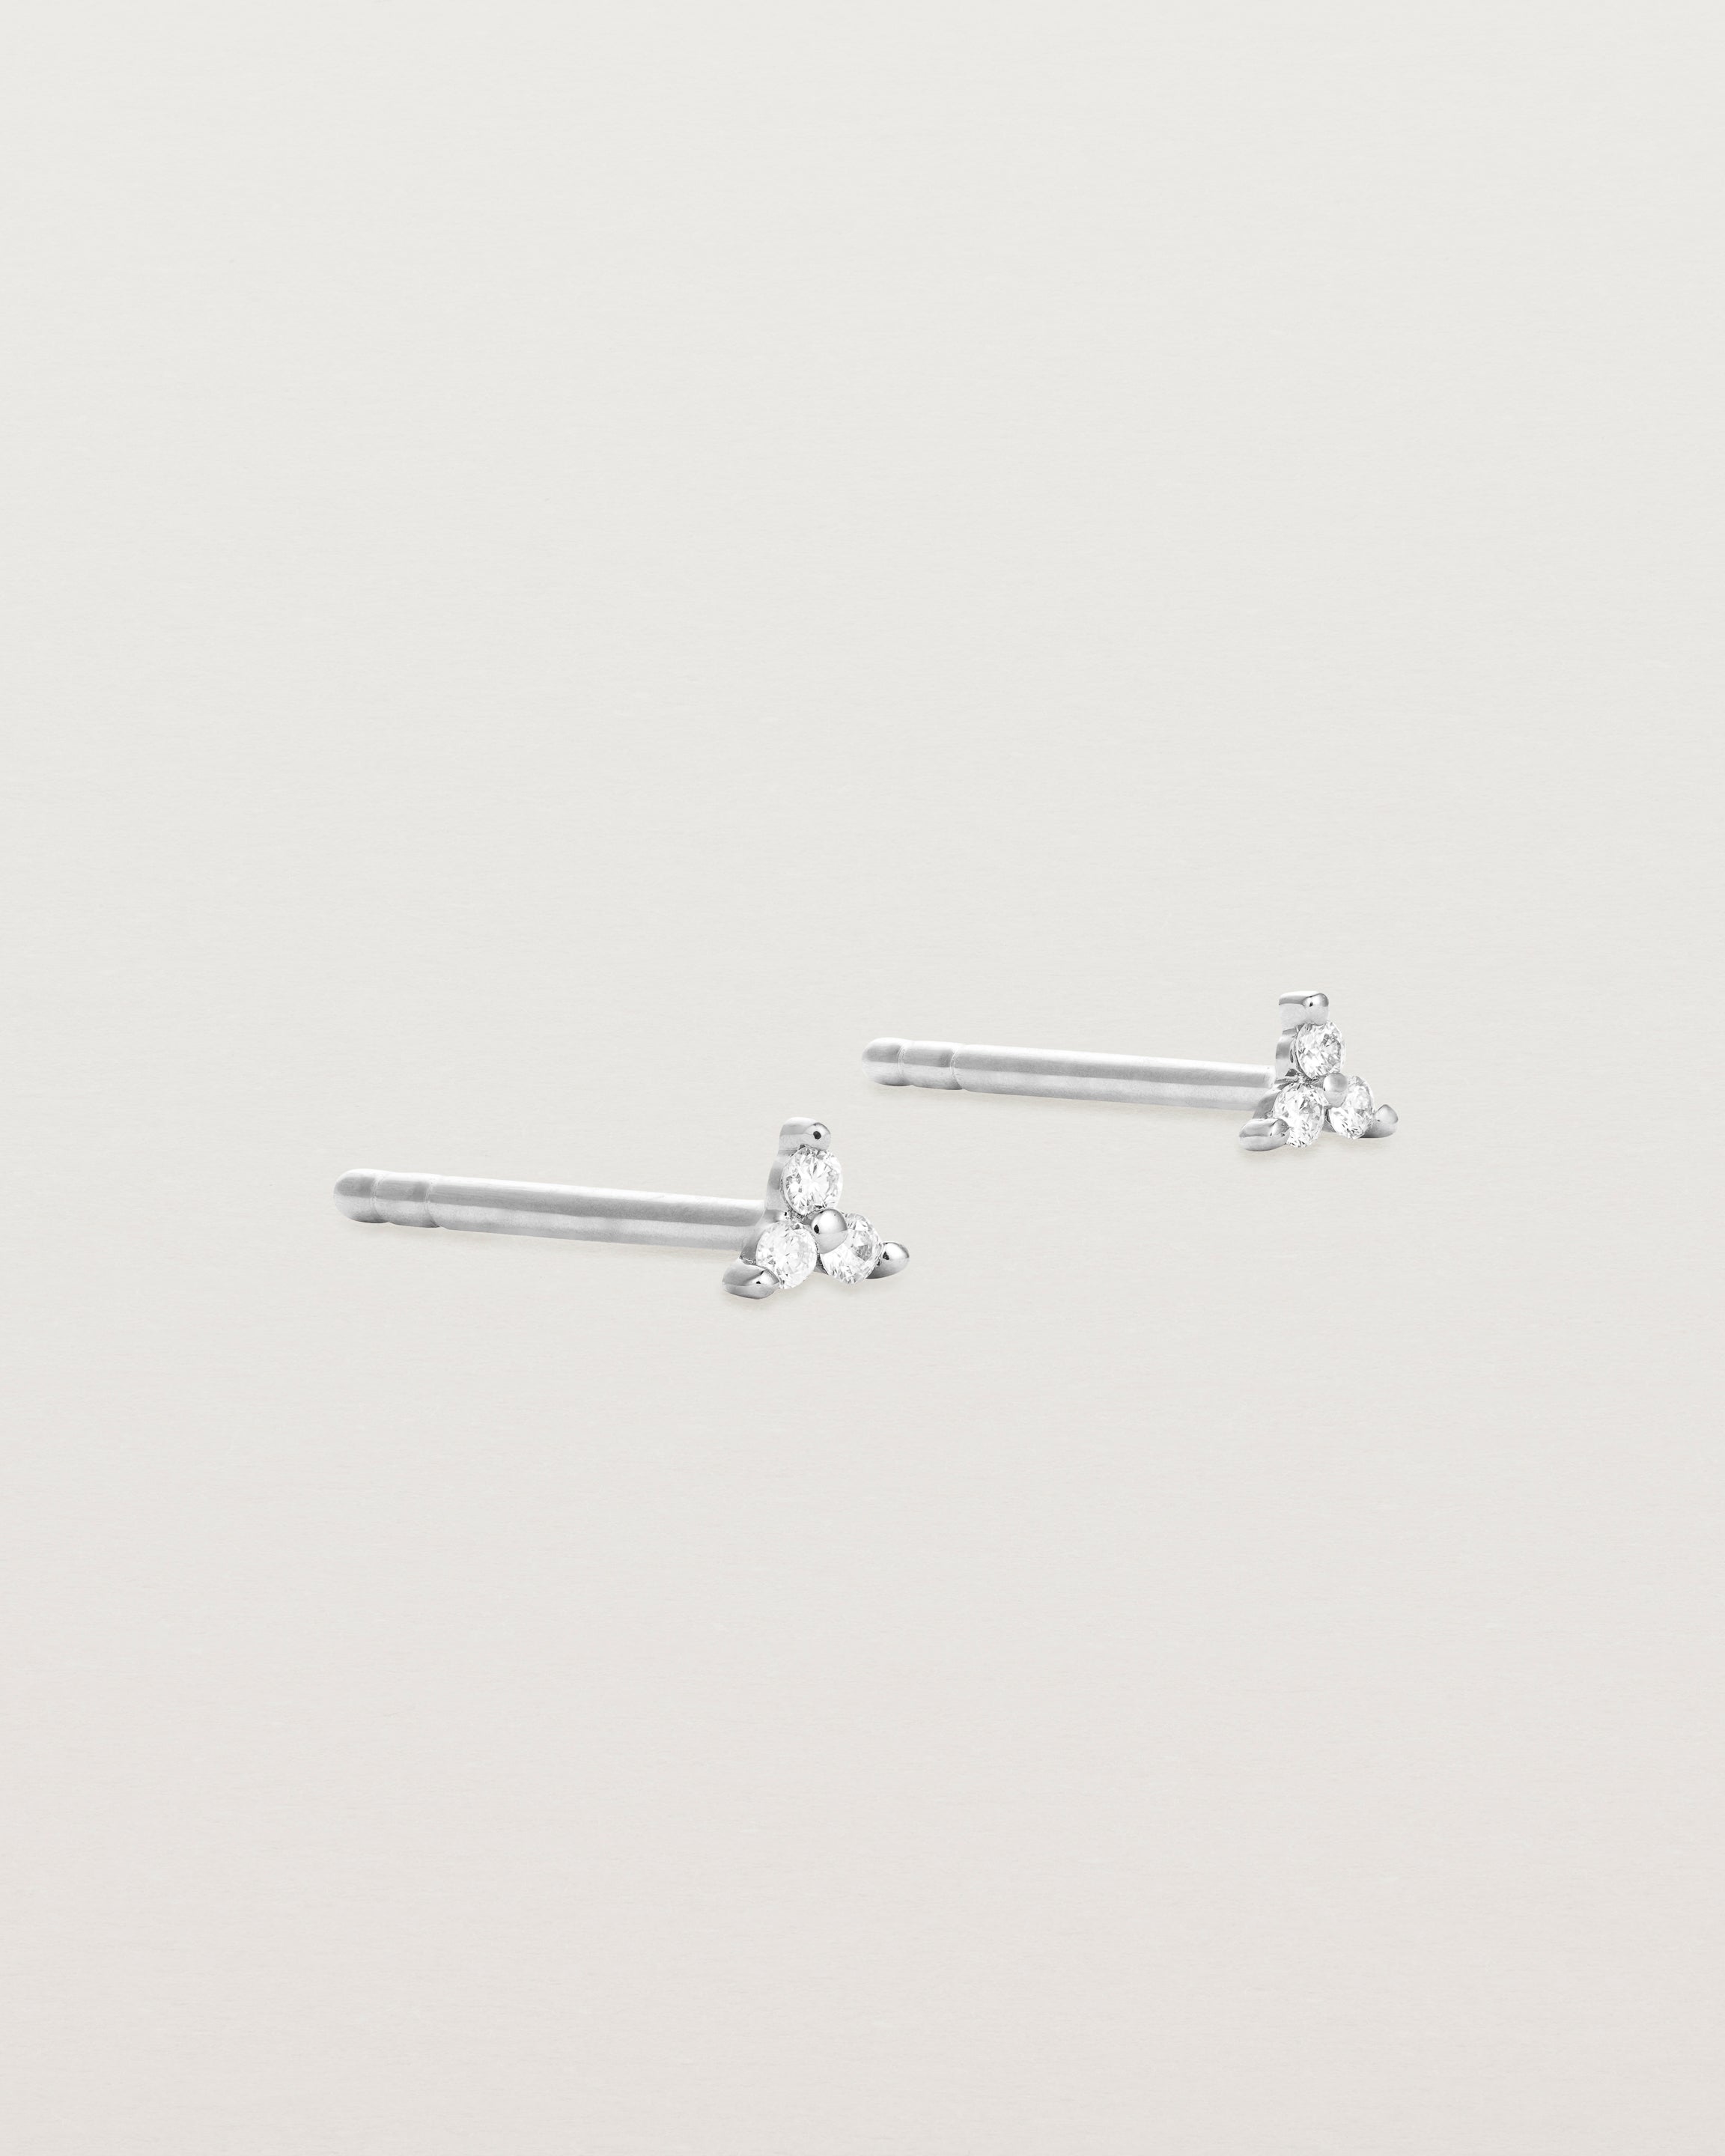 A pair of white gold studs with three small white diamonds.